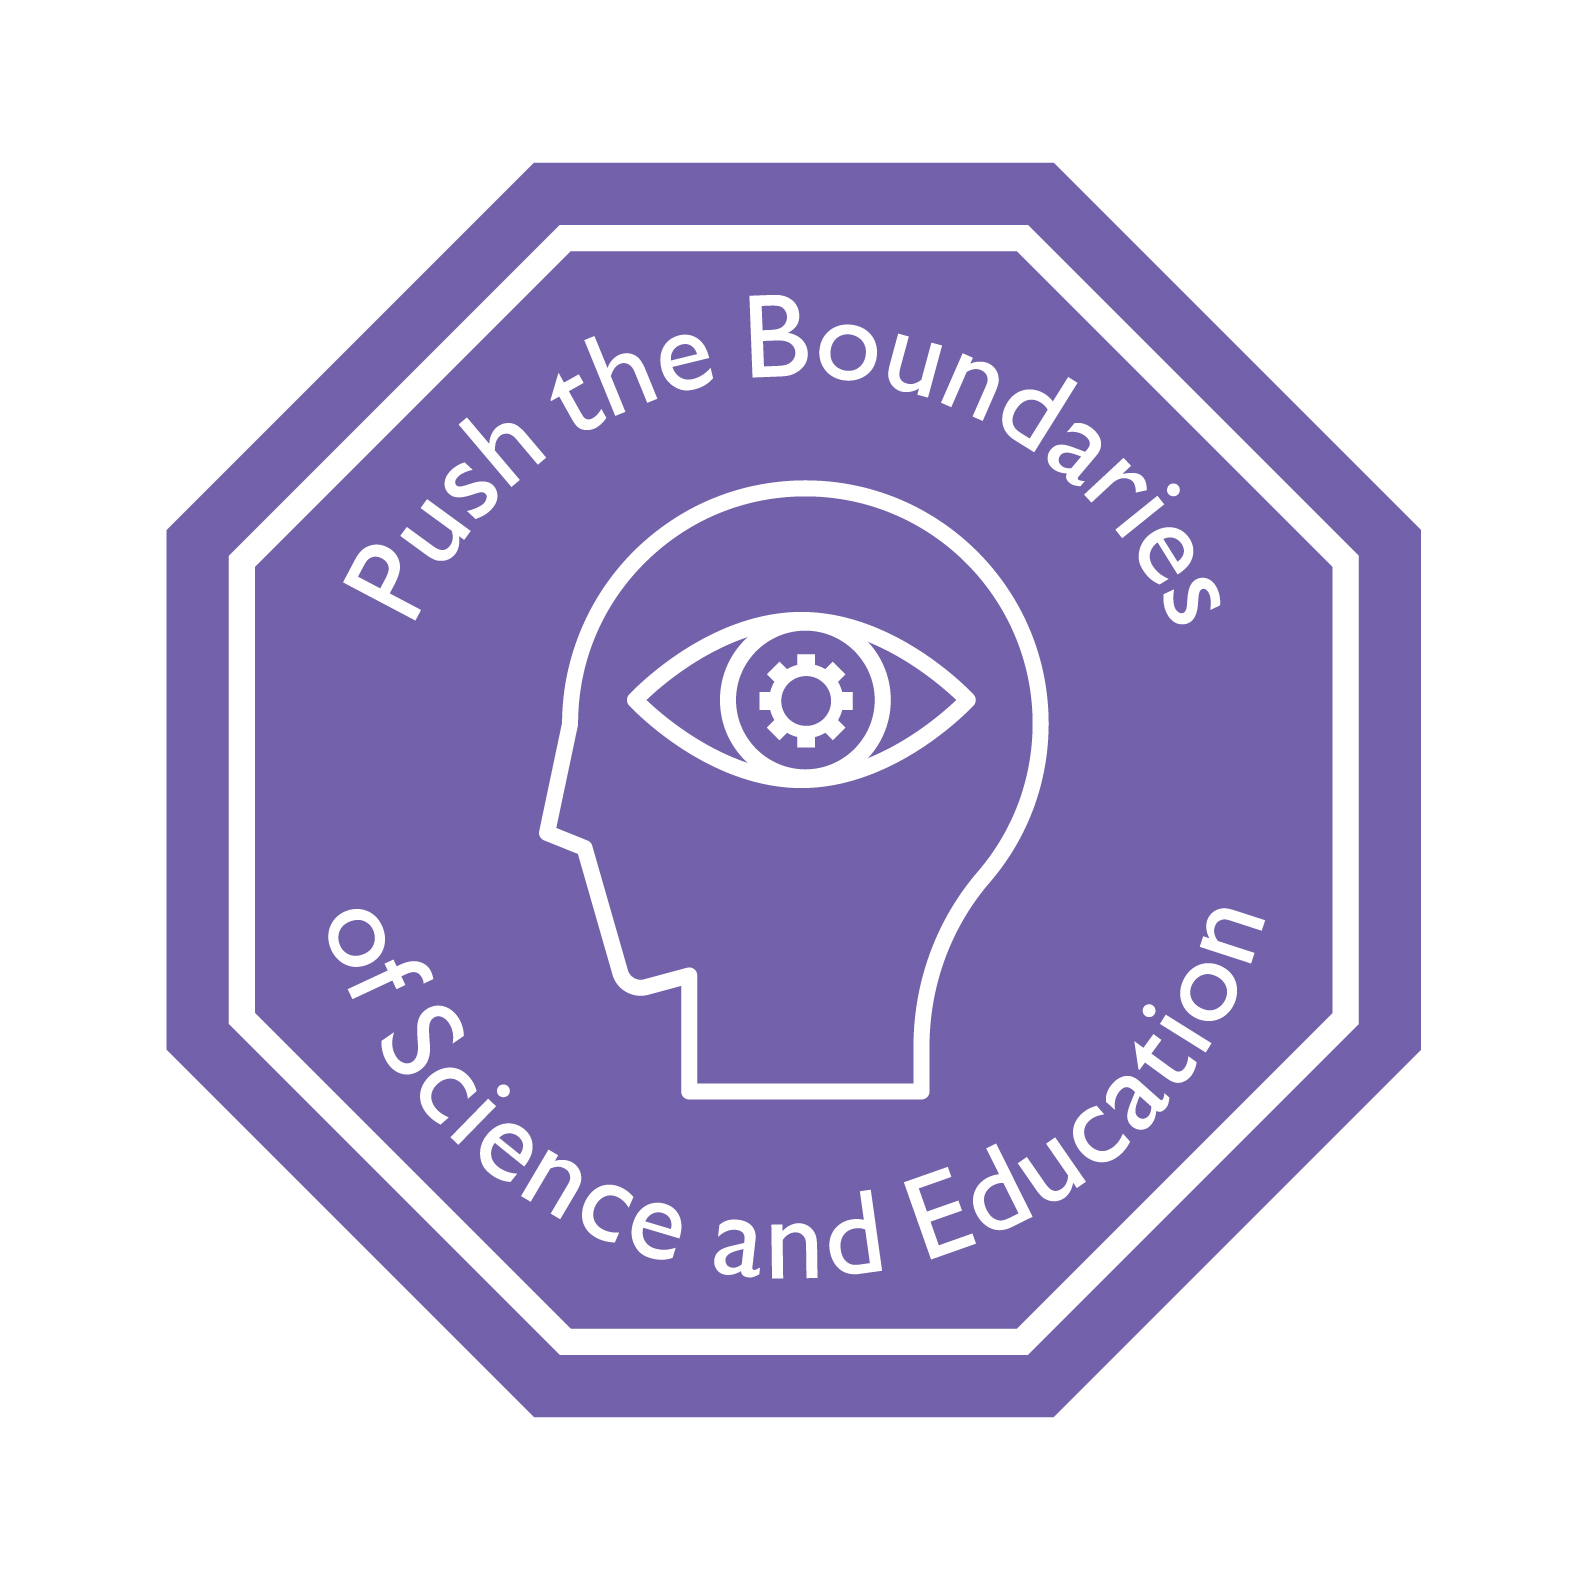 push boundaries of science and education